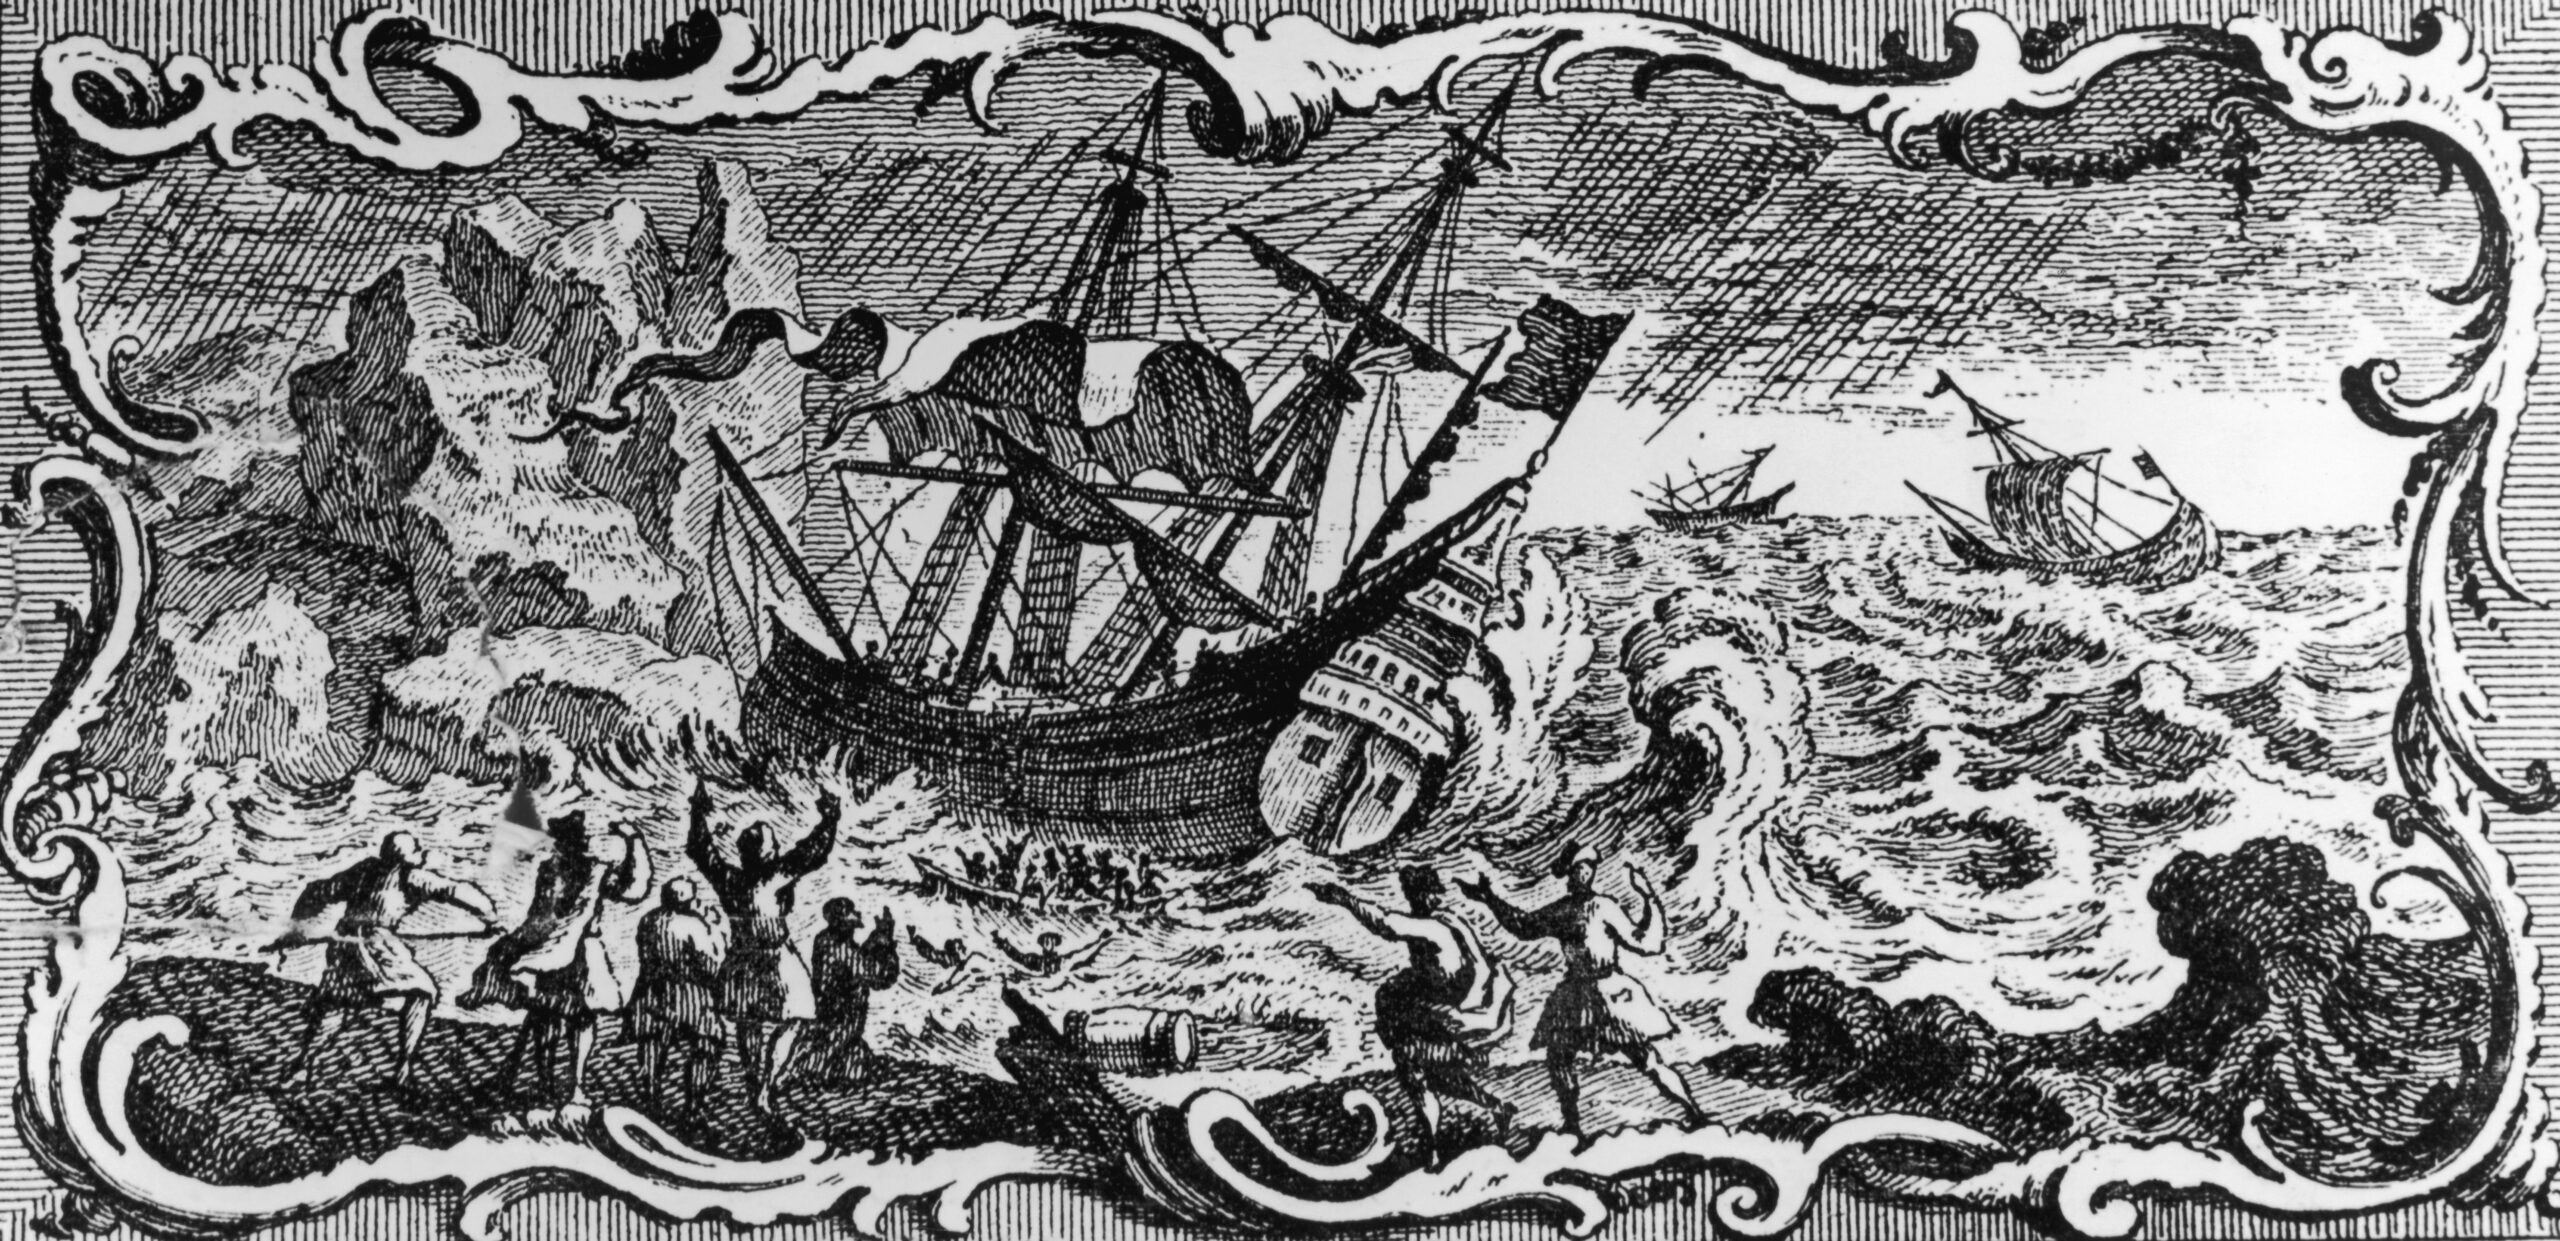 A pirate ship or 'corsair' encounters bad weather off the Barbary Coast of North Africa, circa 1650. An engraving by A. Maisonneuve after A. Humblot. (Photo by Hulton Archive/Getty Images)